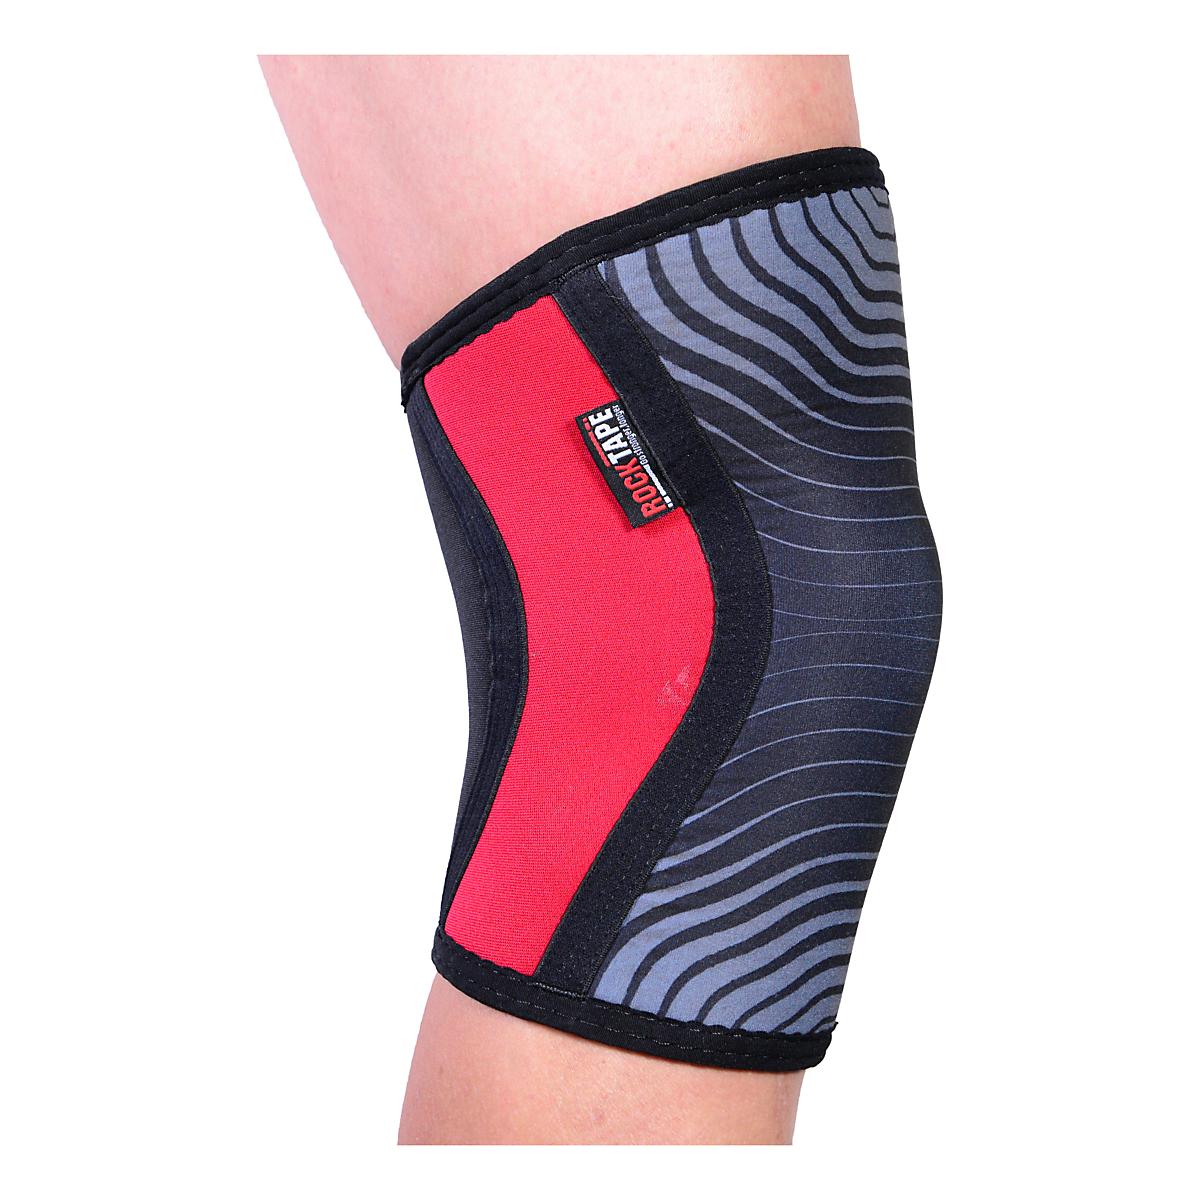 Pro-Tec Athletics Knee Support Wrap Injury Recovery at Road Runner Sports